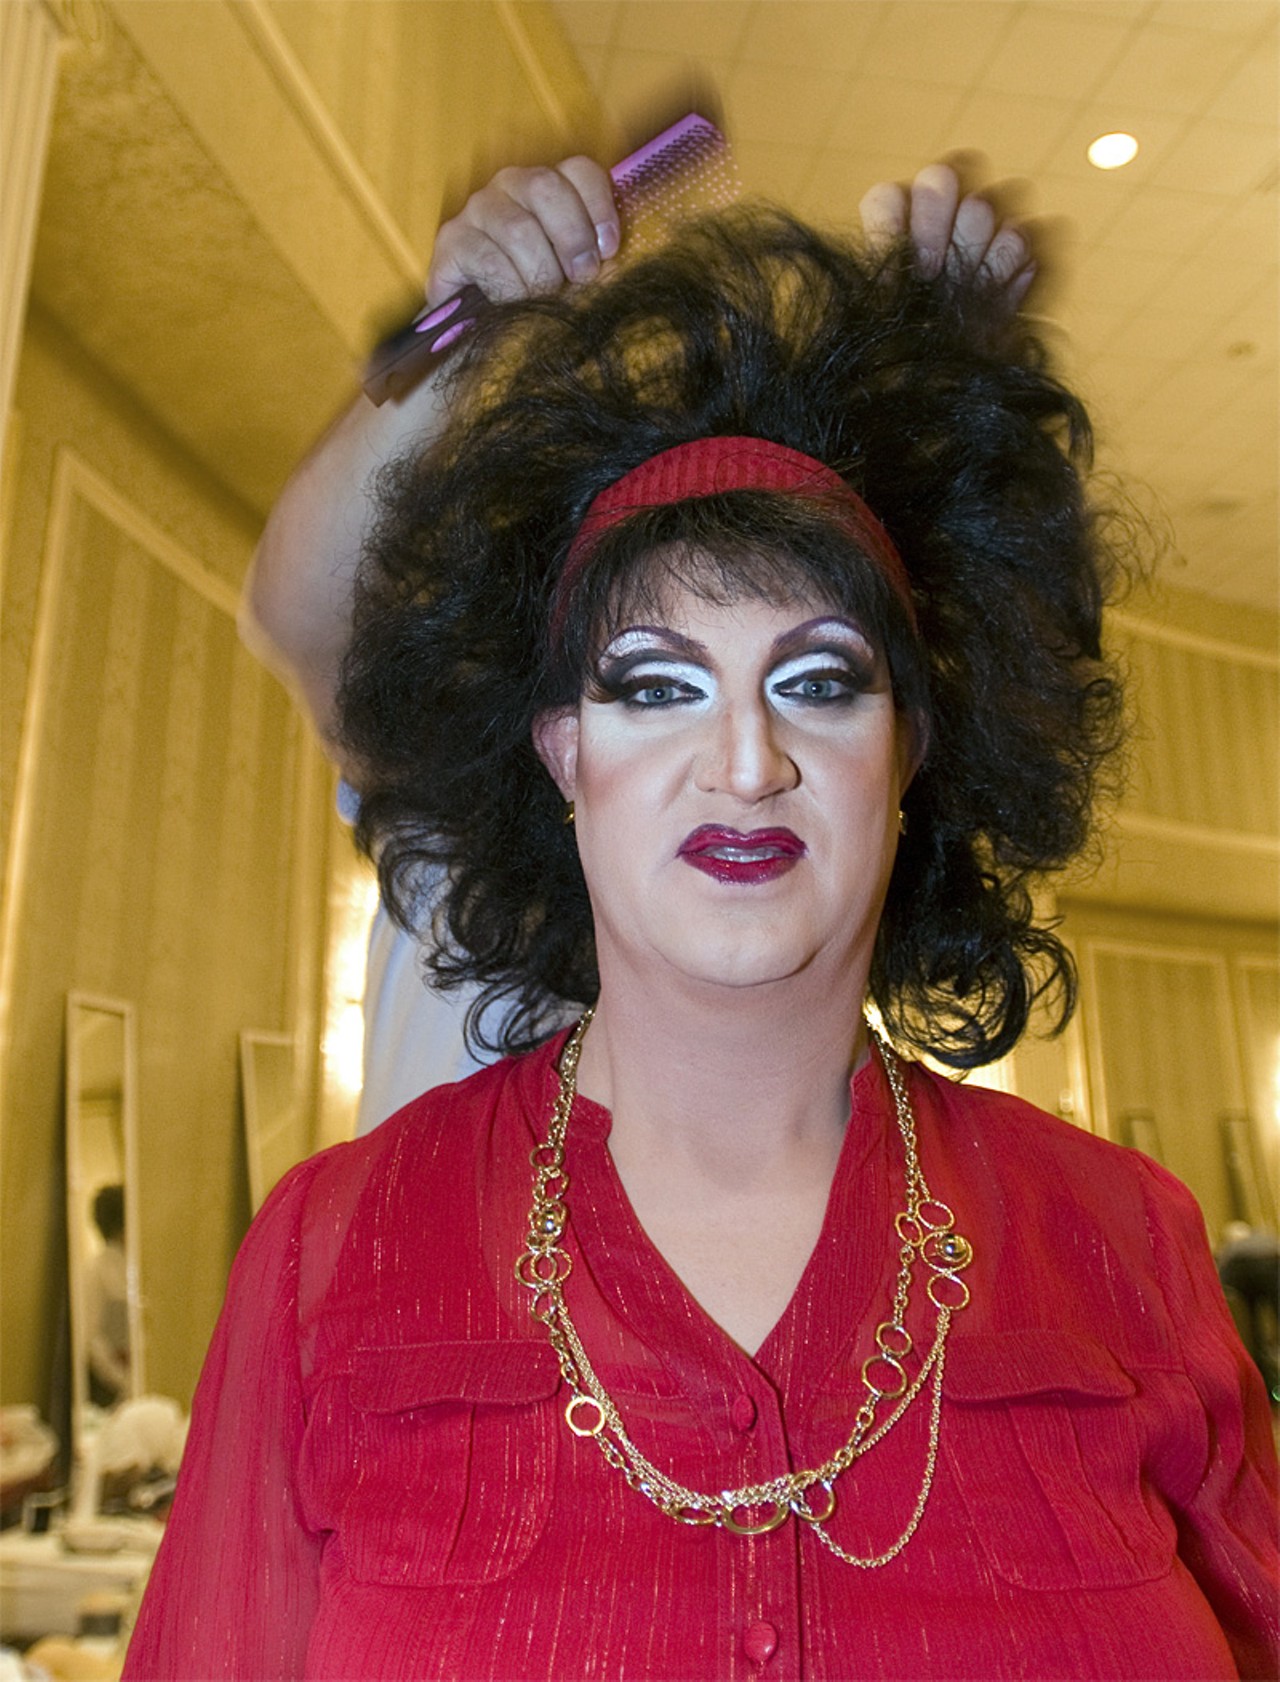 Backstage at Miss Gay America 2009